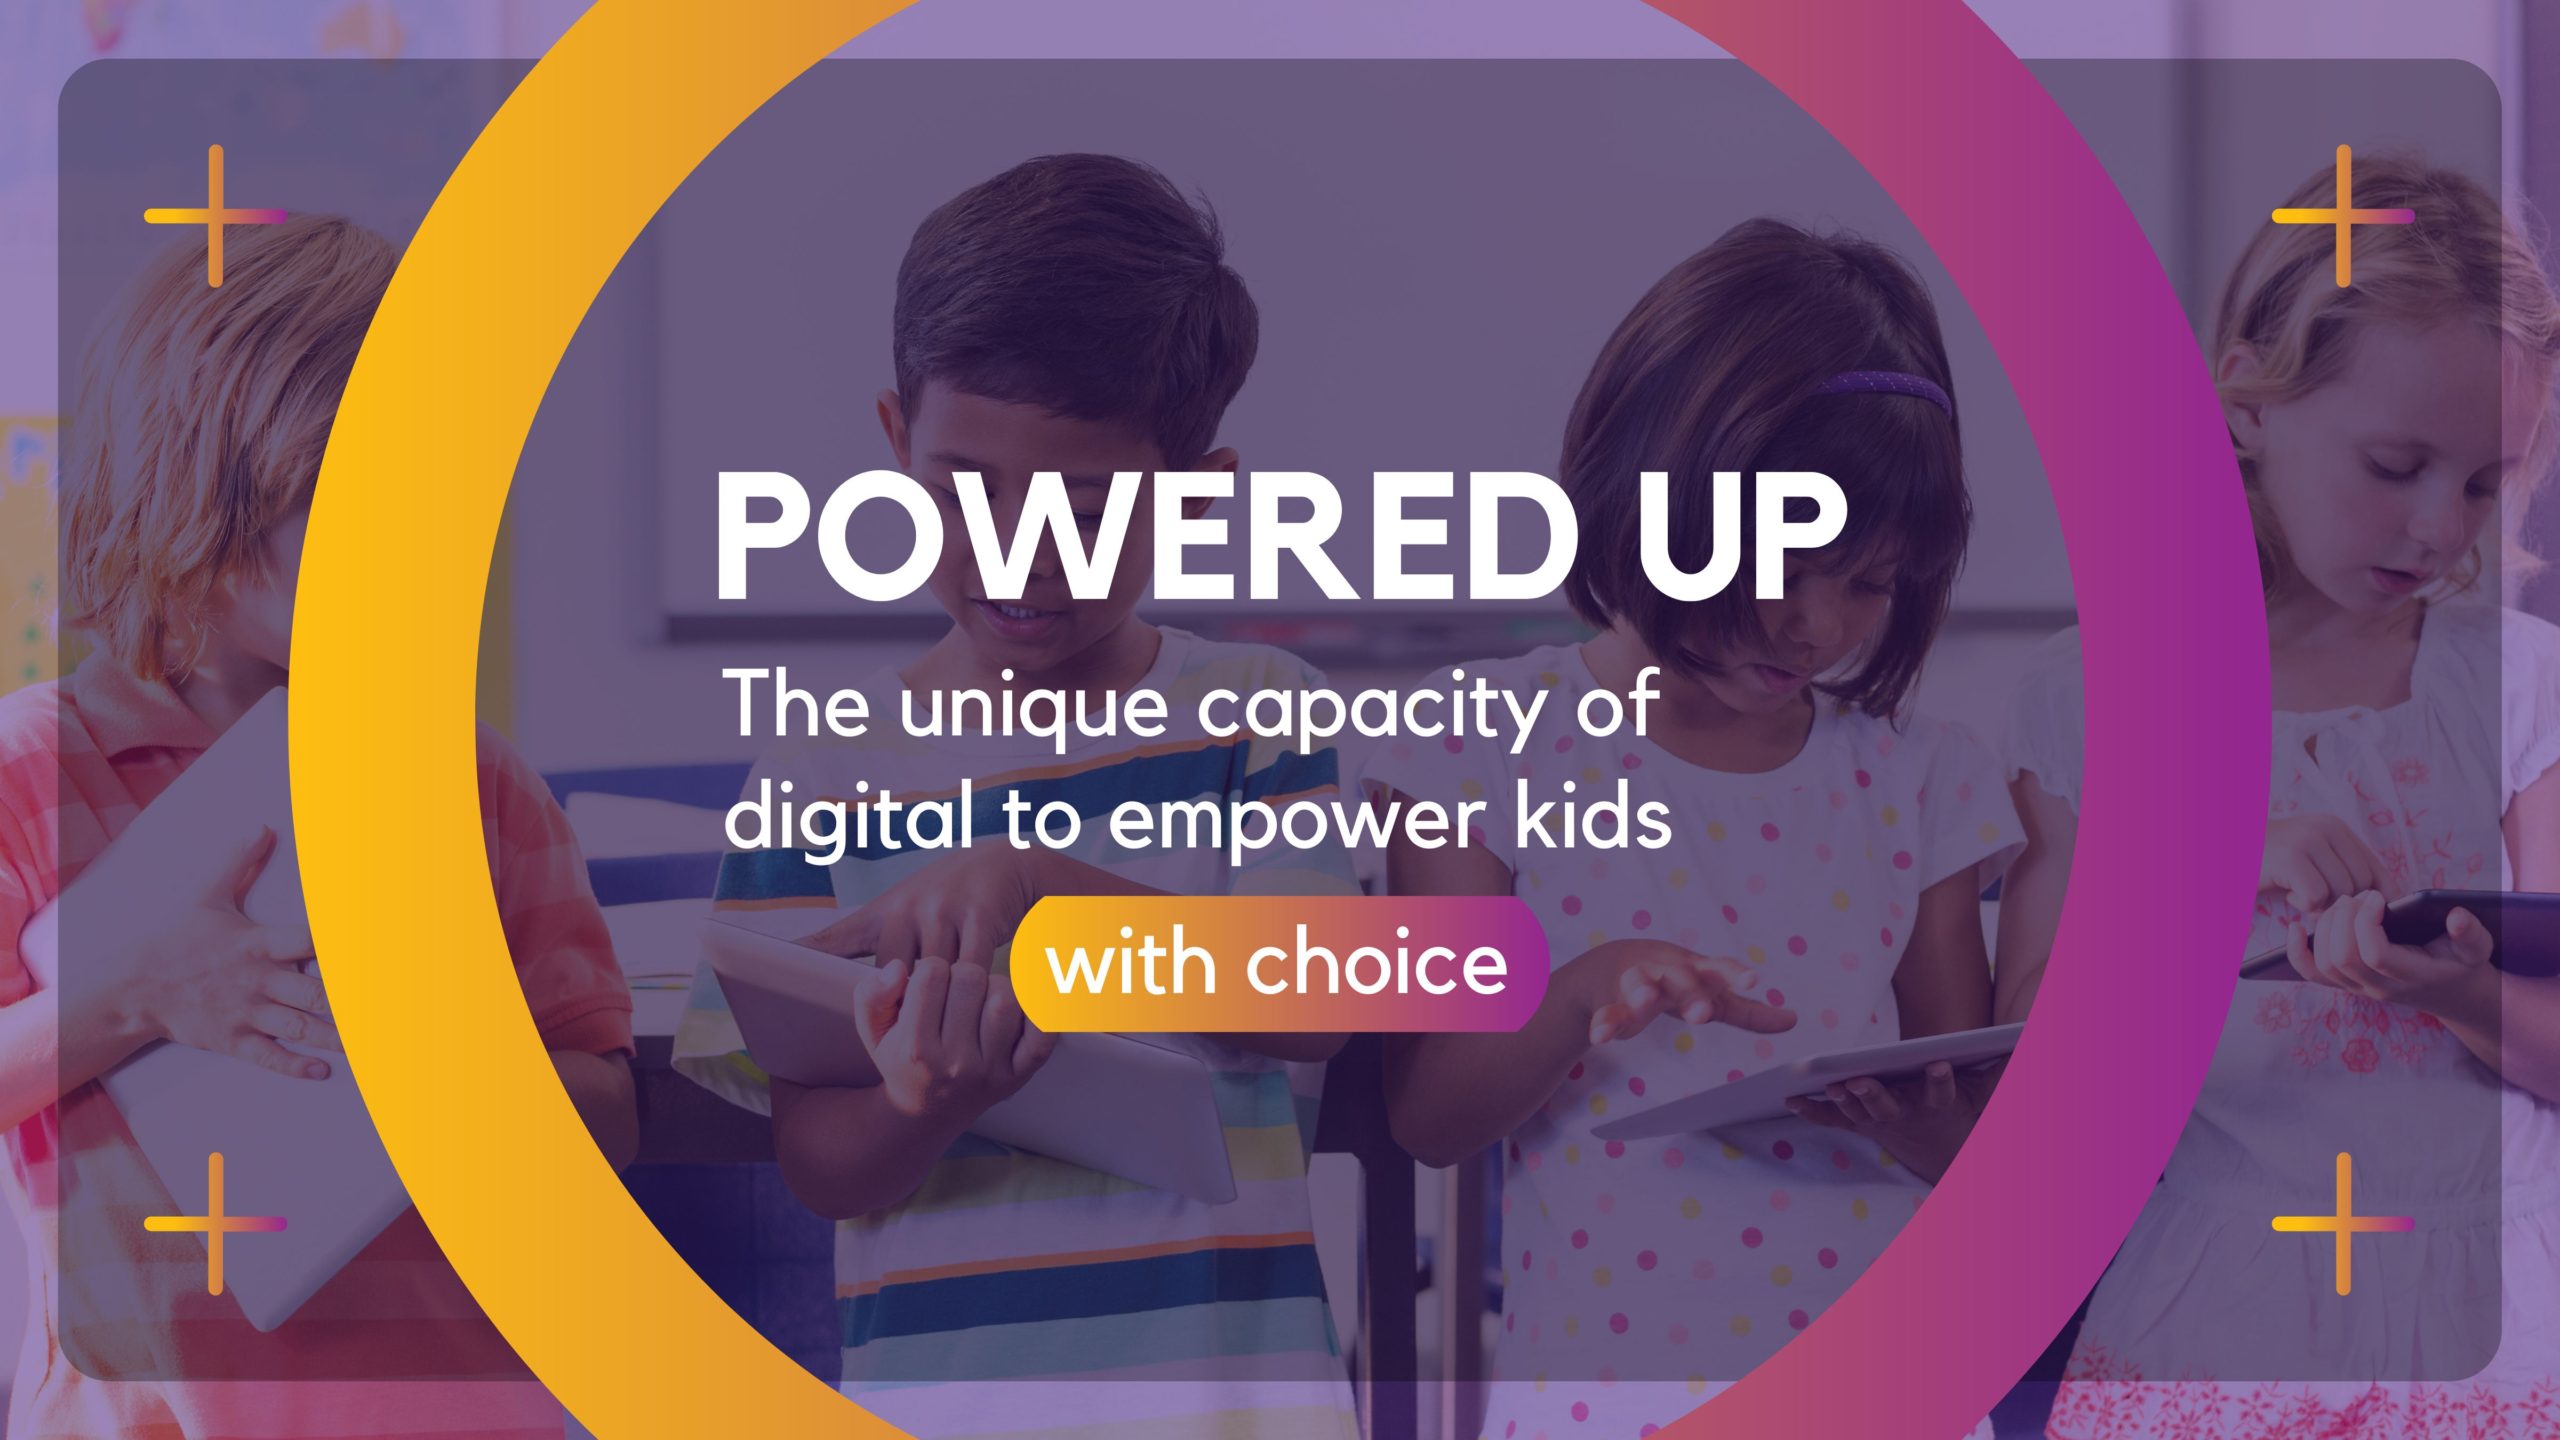 The unique capacity of digital to empower kids with choice